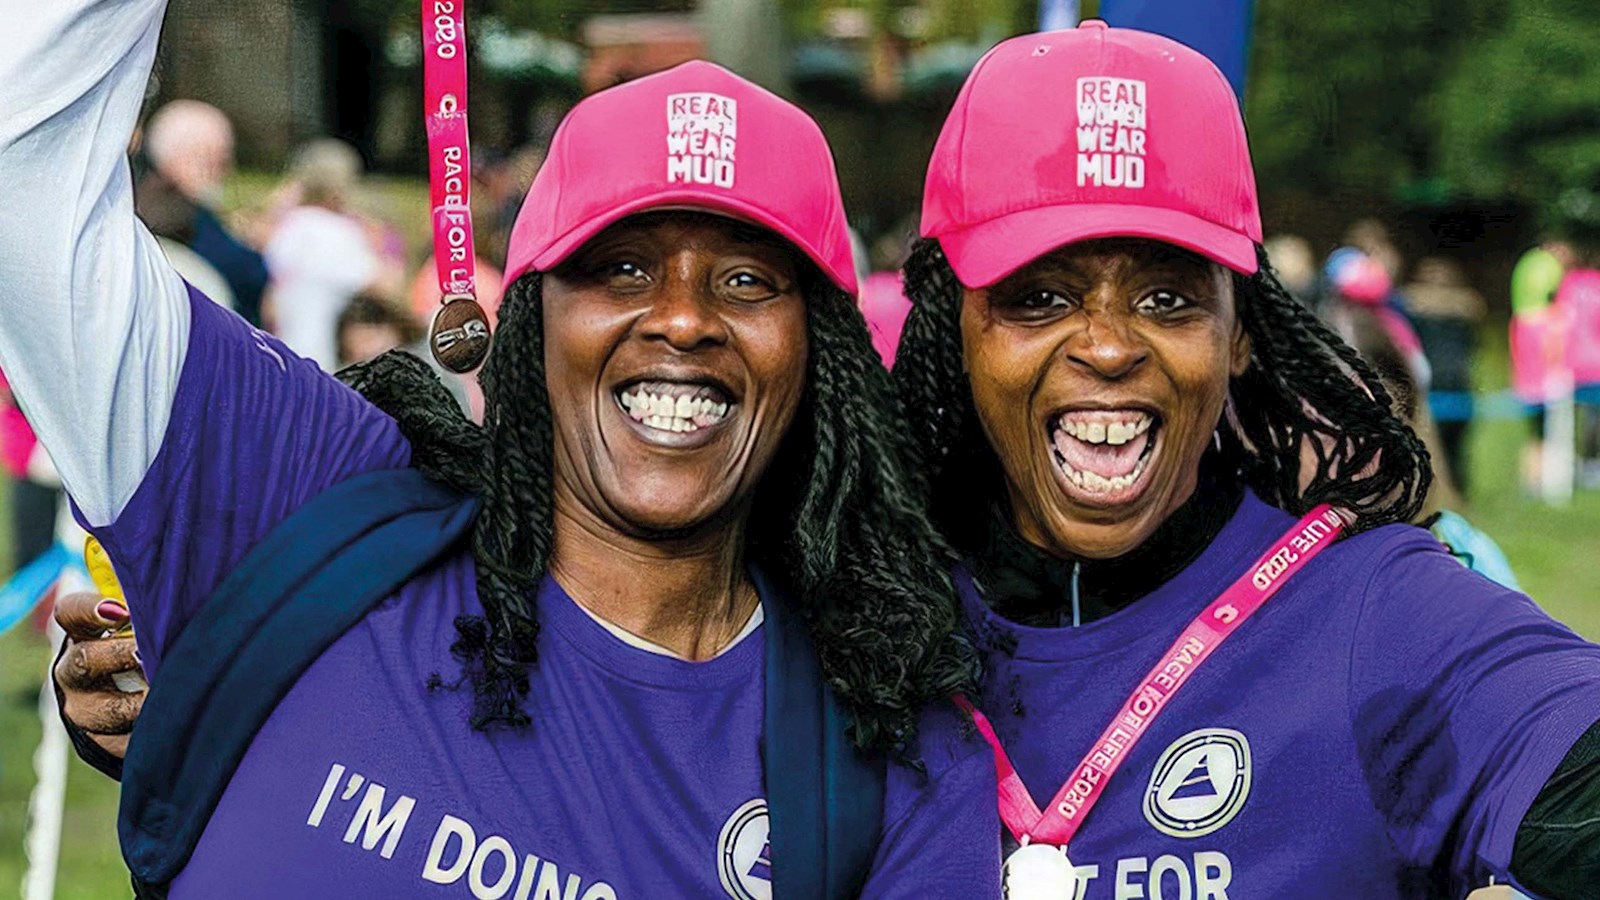 Two women celebrating at Race for Life